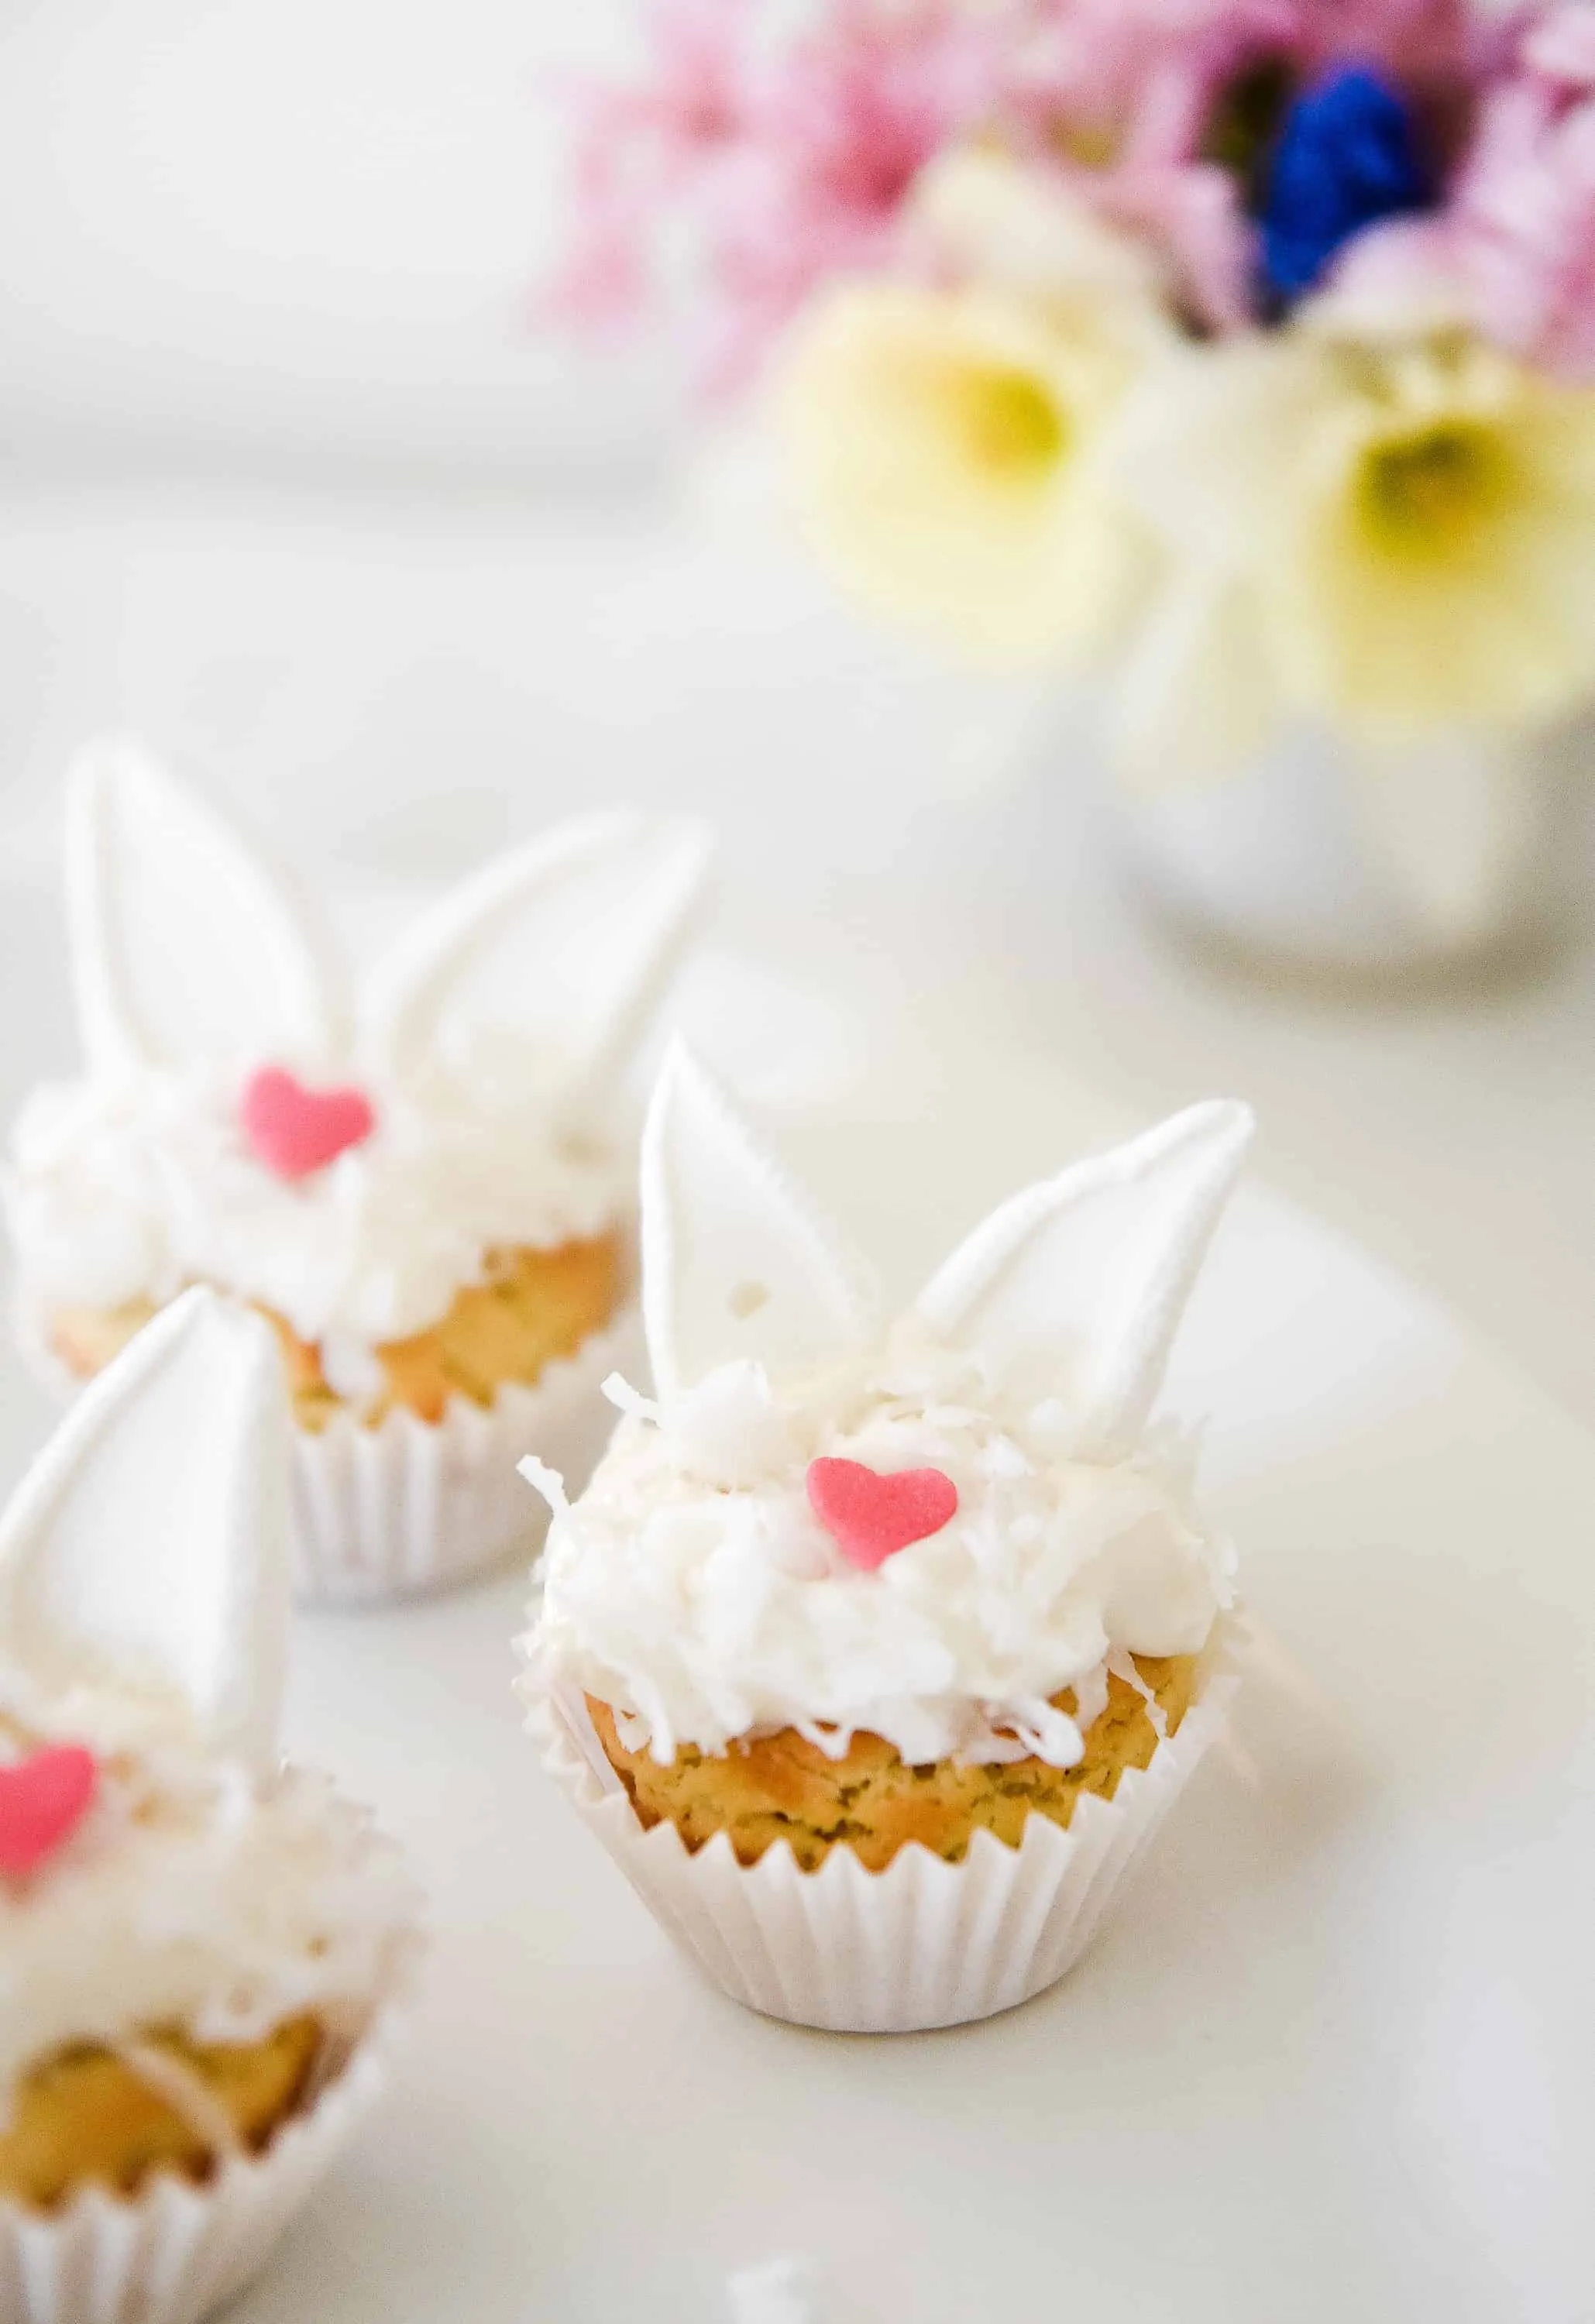 These Easter bunny sugar cookies couldn’t get any sweeter! Take a simple sugar cookie and turn it into the perfect Easter dessert by adding marshmallow bunny ears!